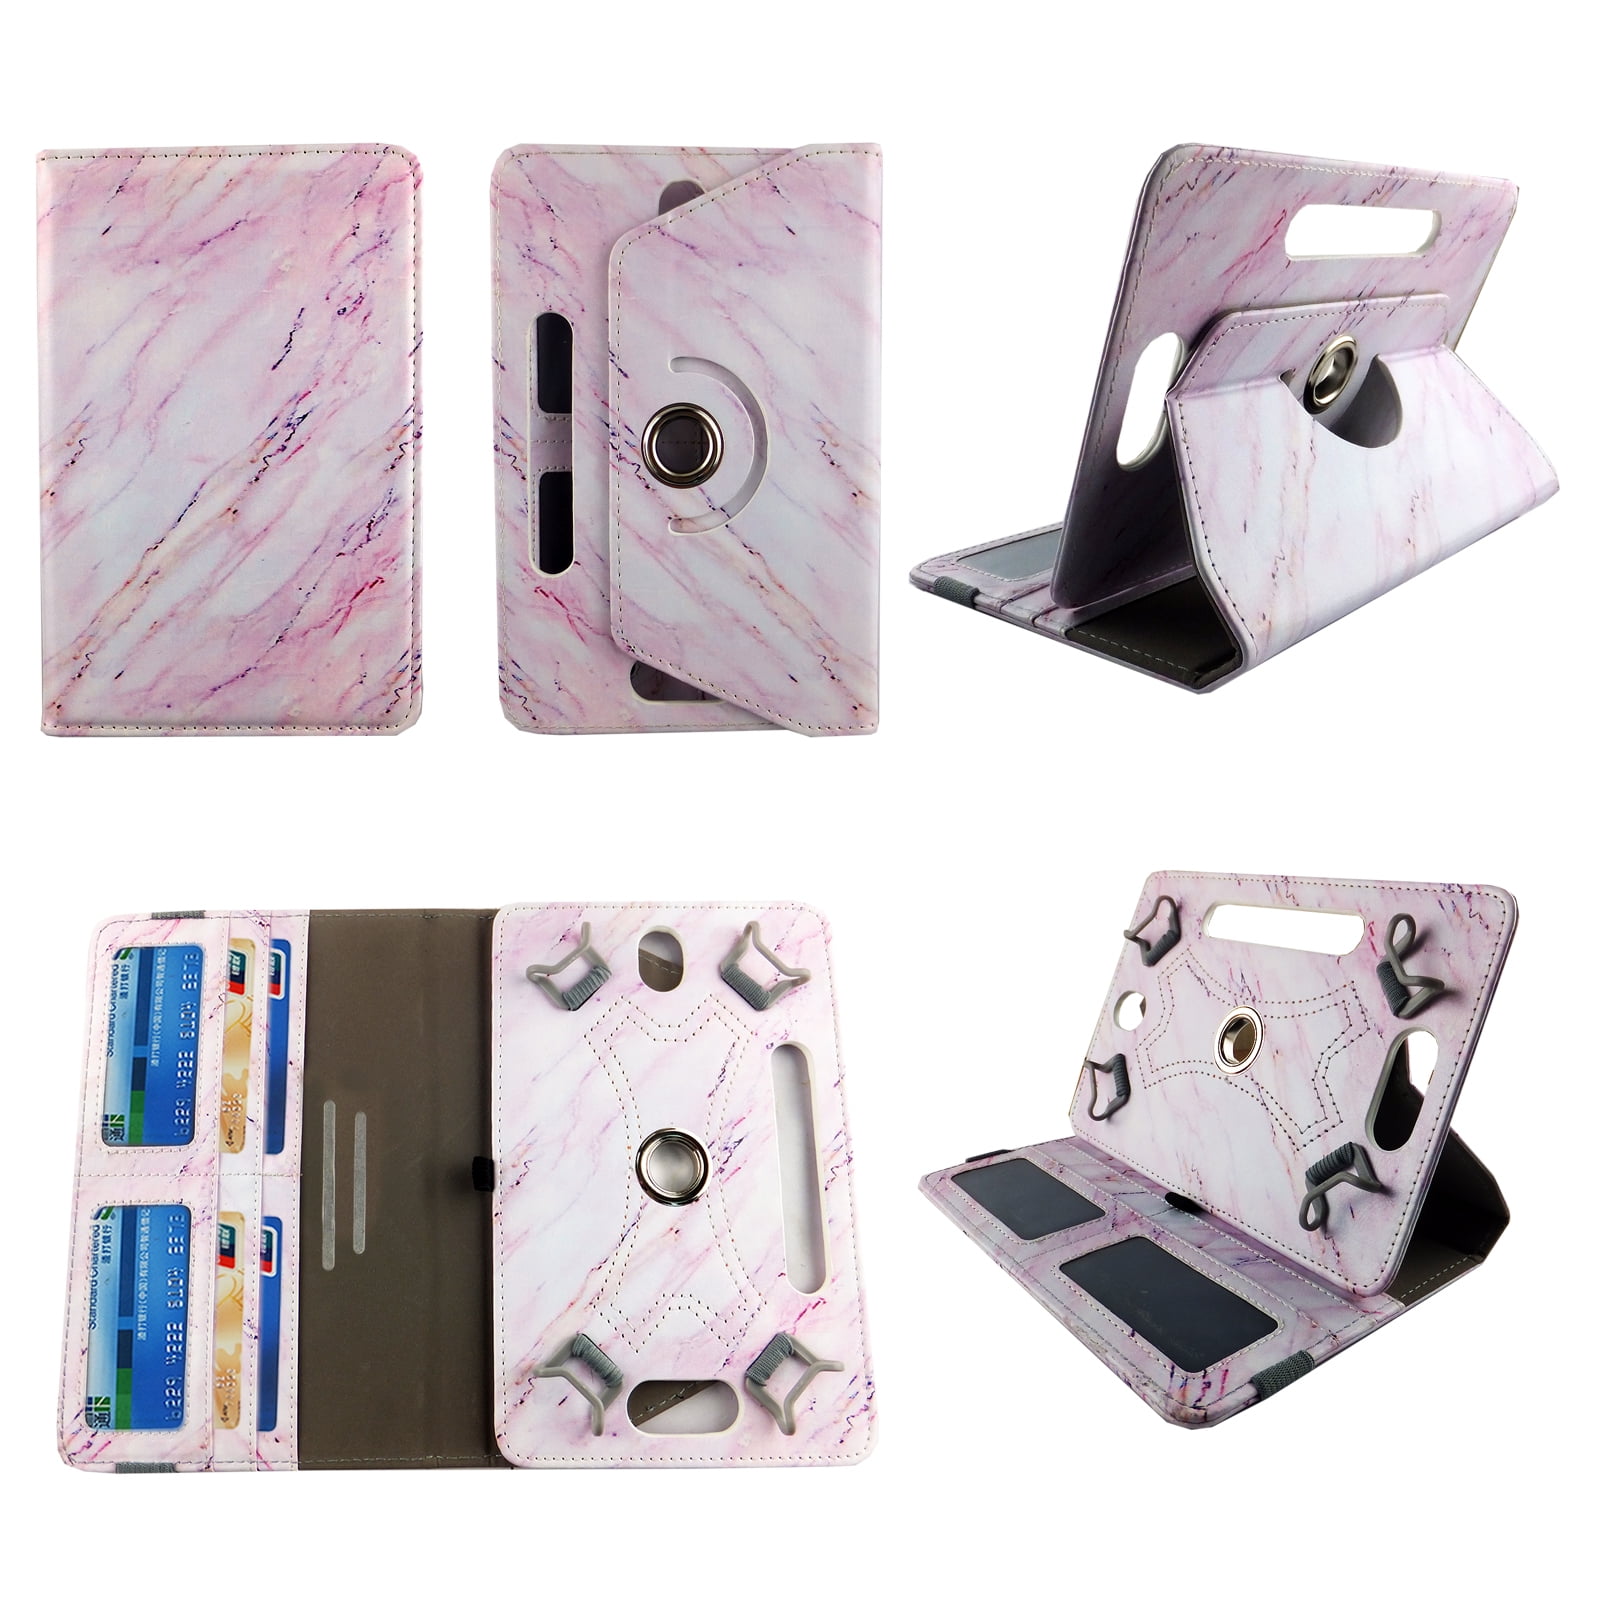 Archeoloog commando Fysica Pink Marble tablet case 7 inch for LG G Pad LTE 7" 7inch android tablet  cases 360 rotating slim folio stand protector pu leather cover travel  e-reader cash slots - Walmart.com